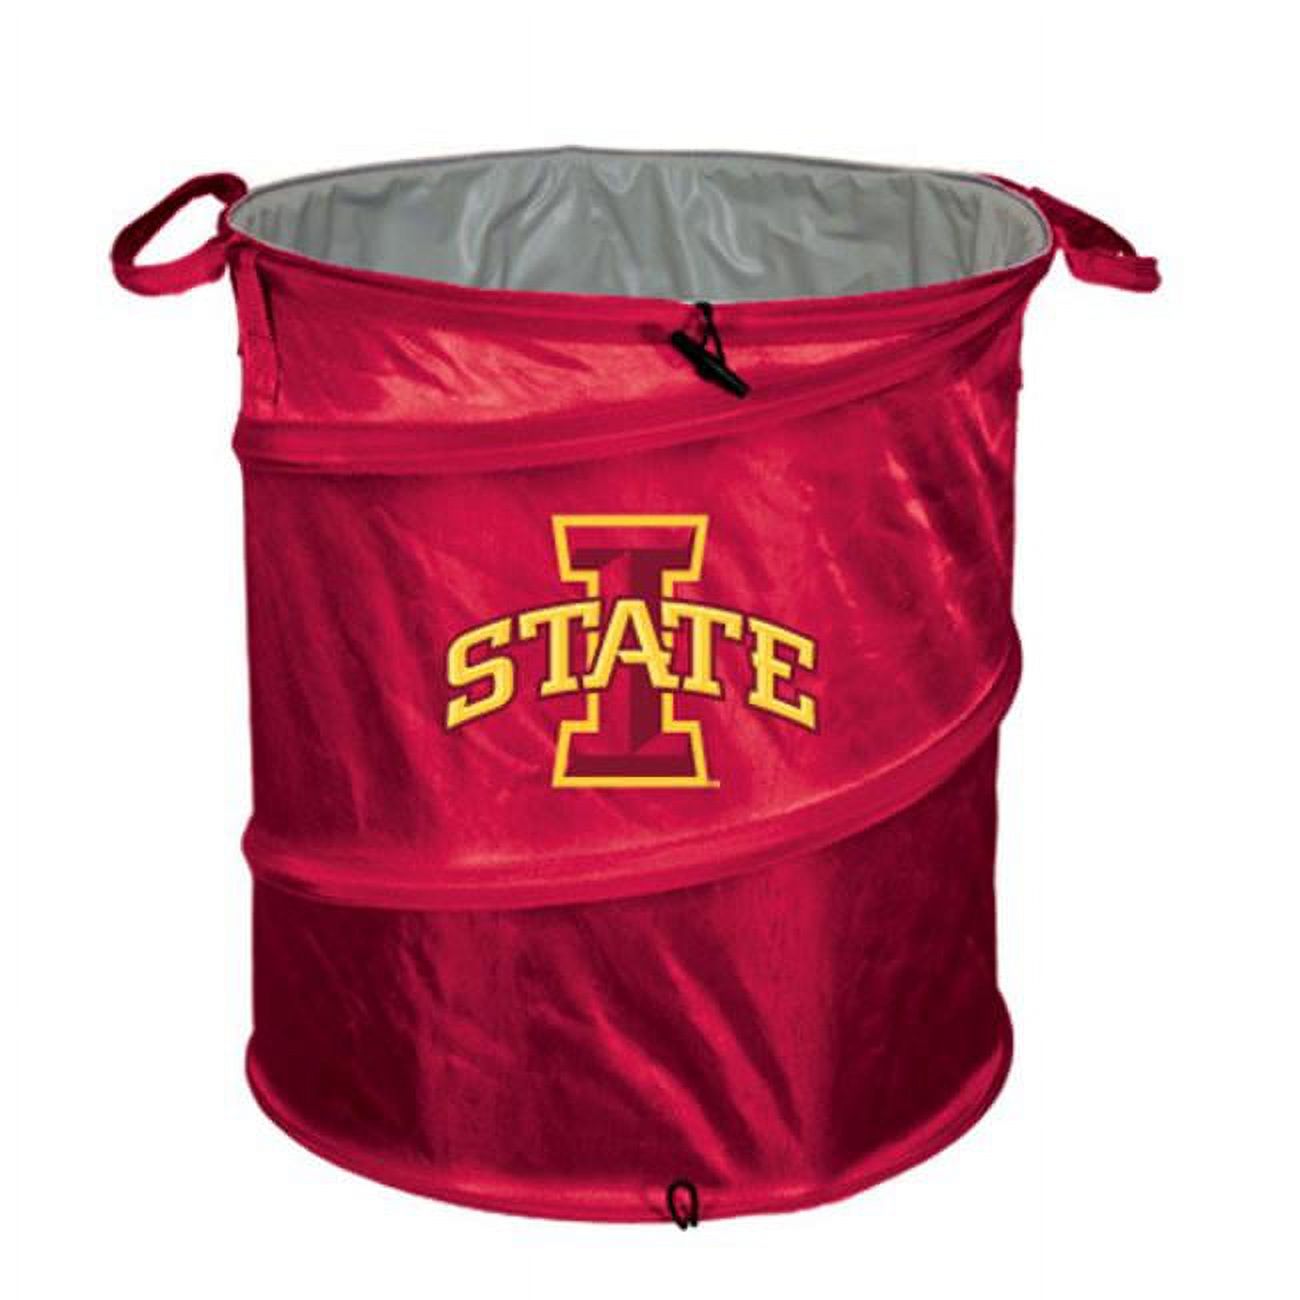 Logo Brands 156-35 Iowa State Trash Can - image 1 of 2